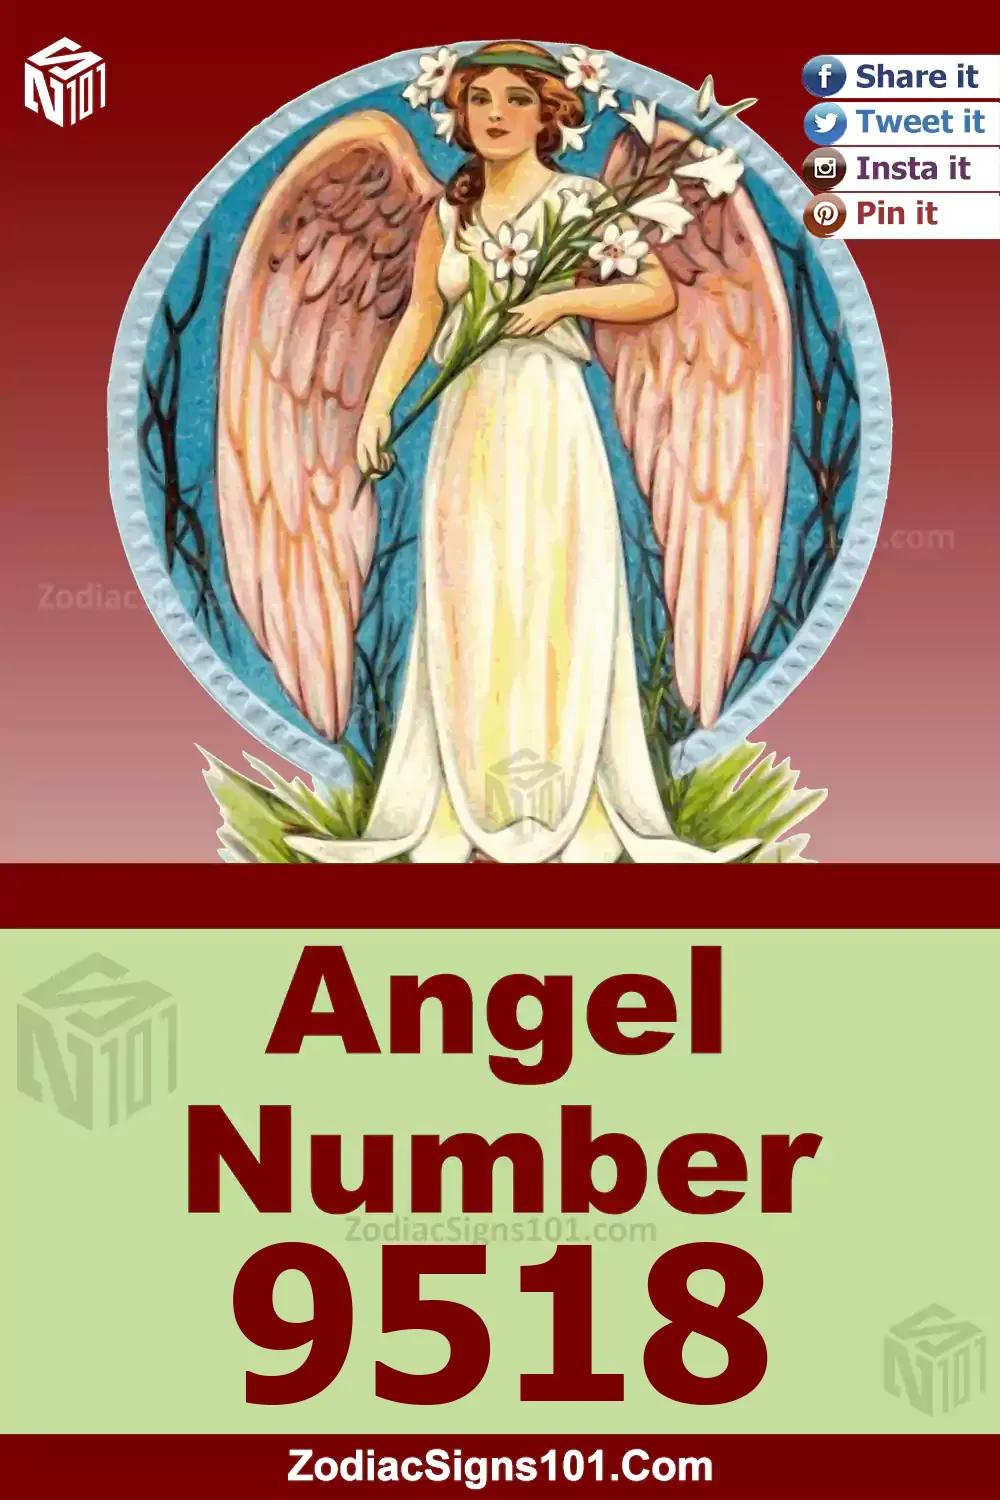 9518 Angel Number Meaning